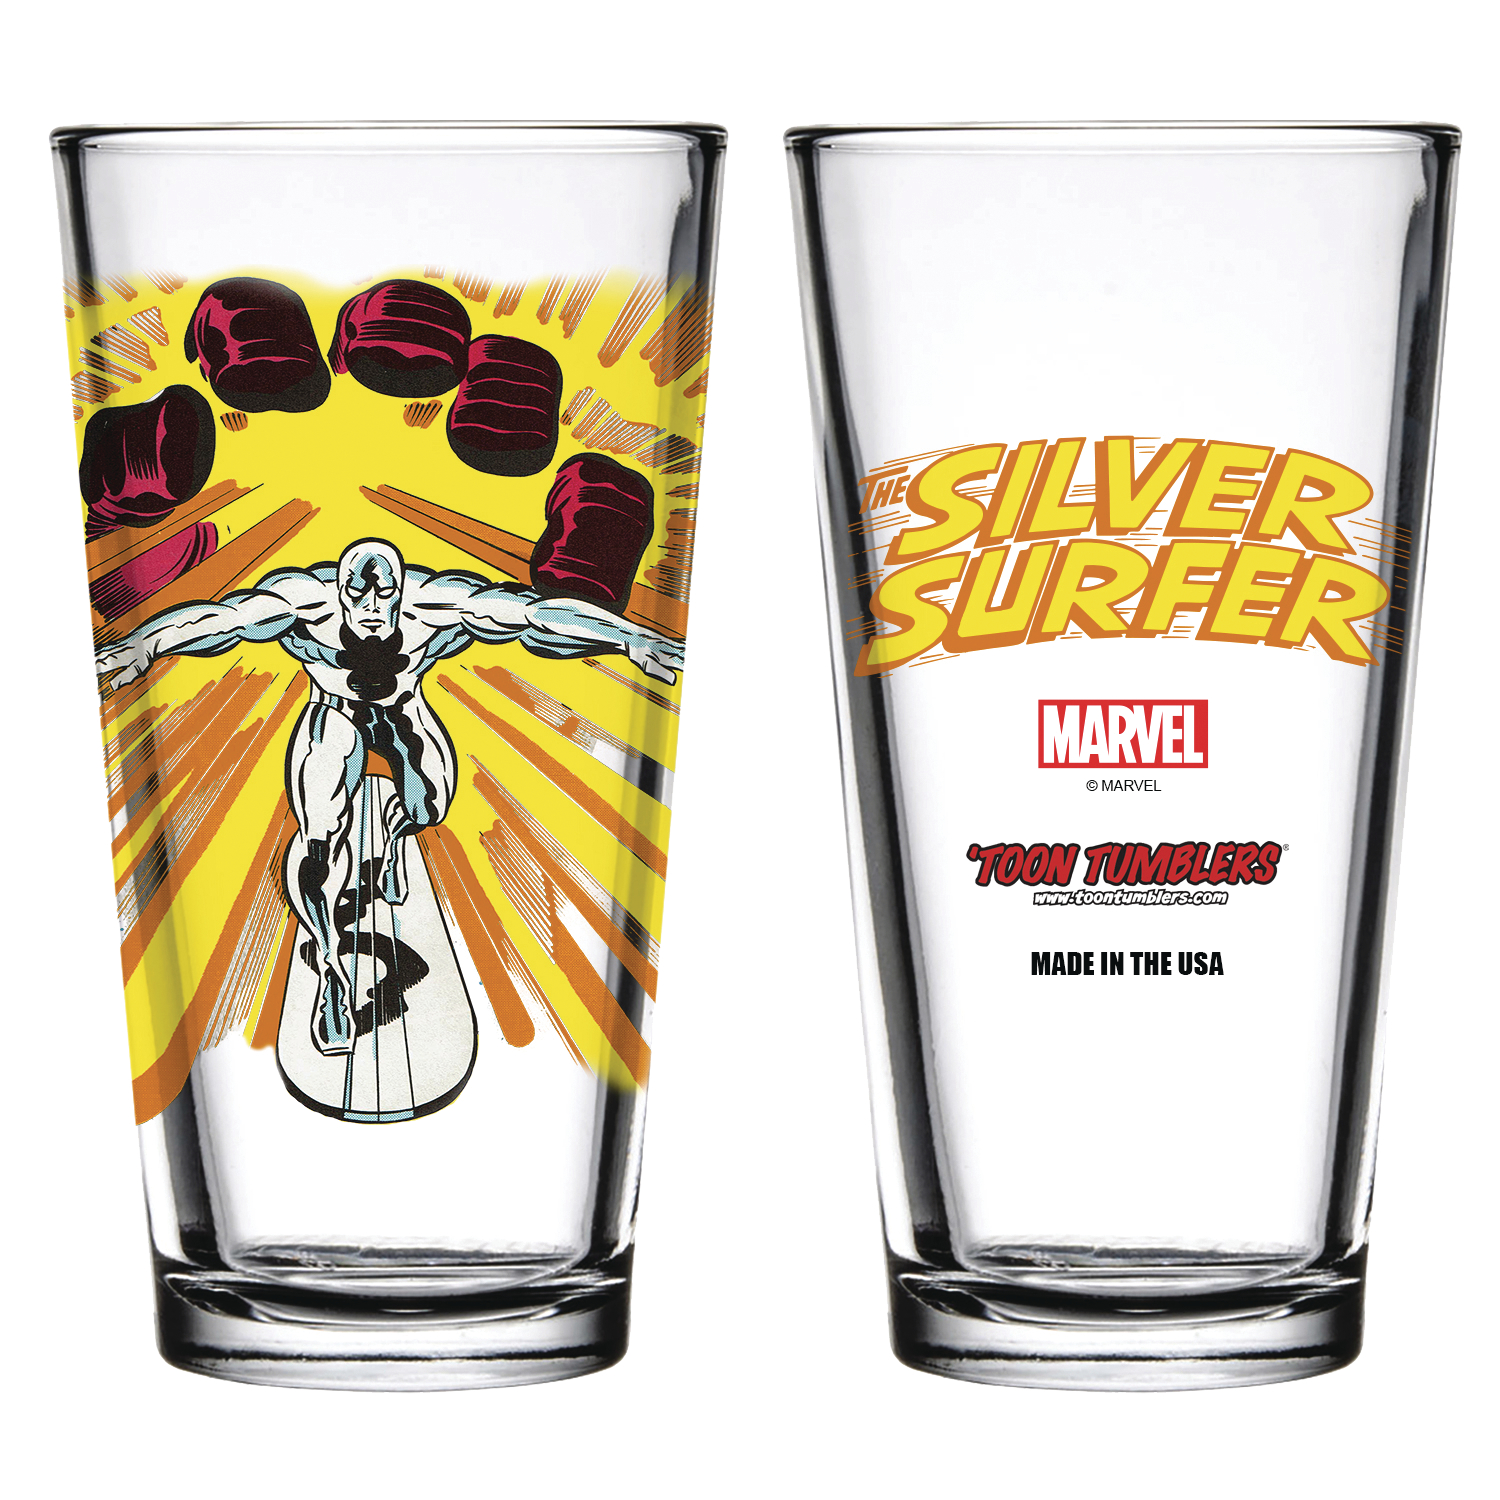 Toon Tumblers Series 3 Silver Sufer Clear Pint Glass